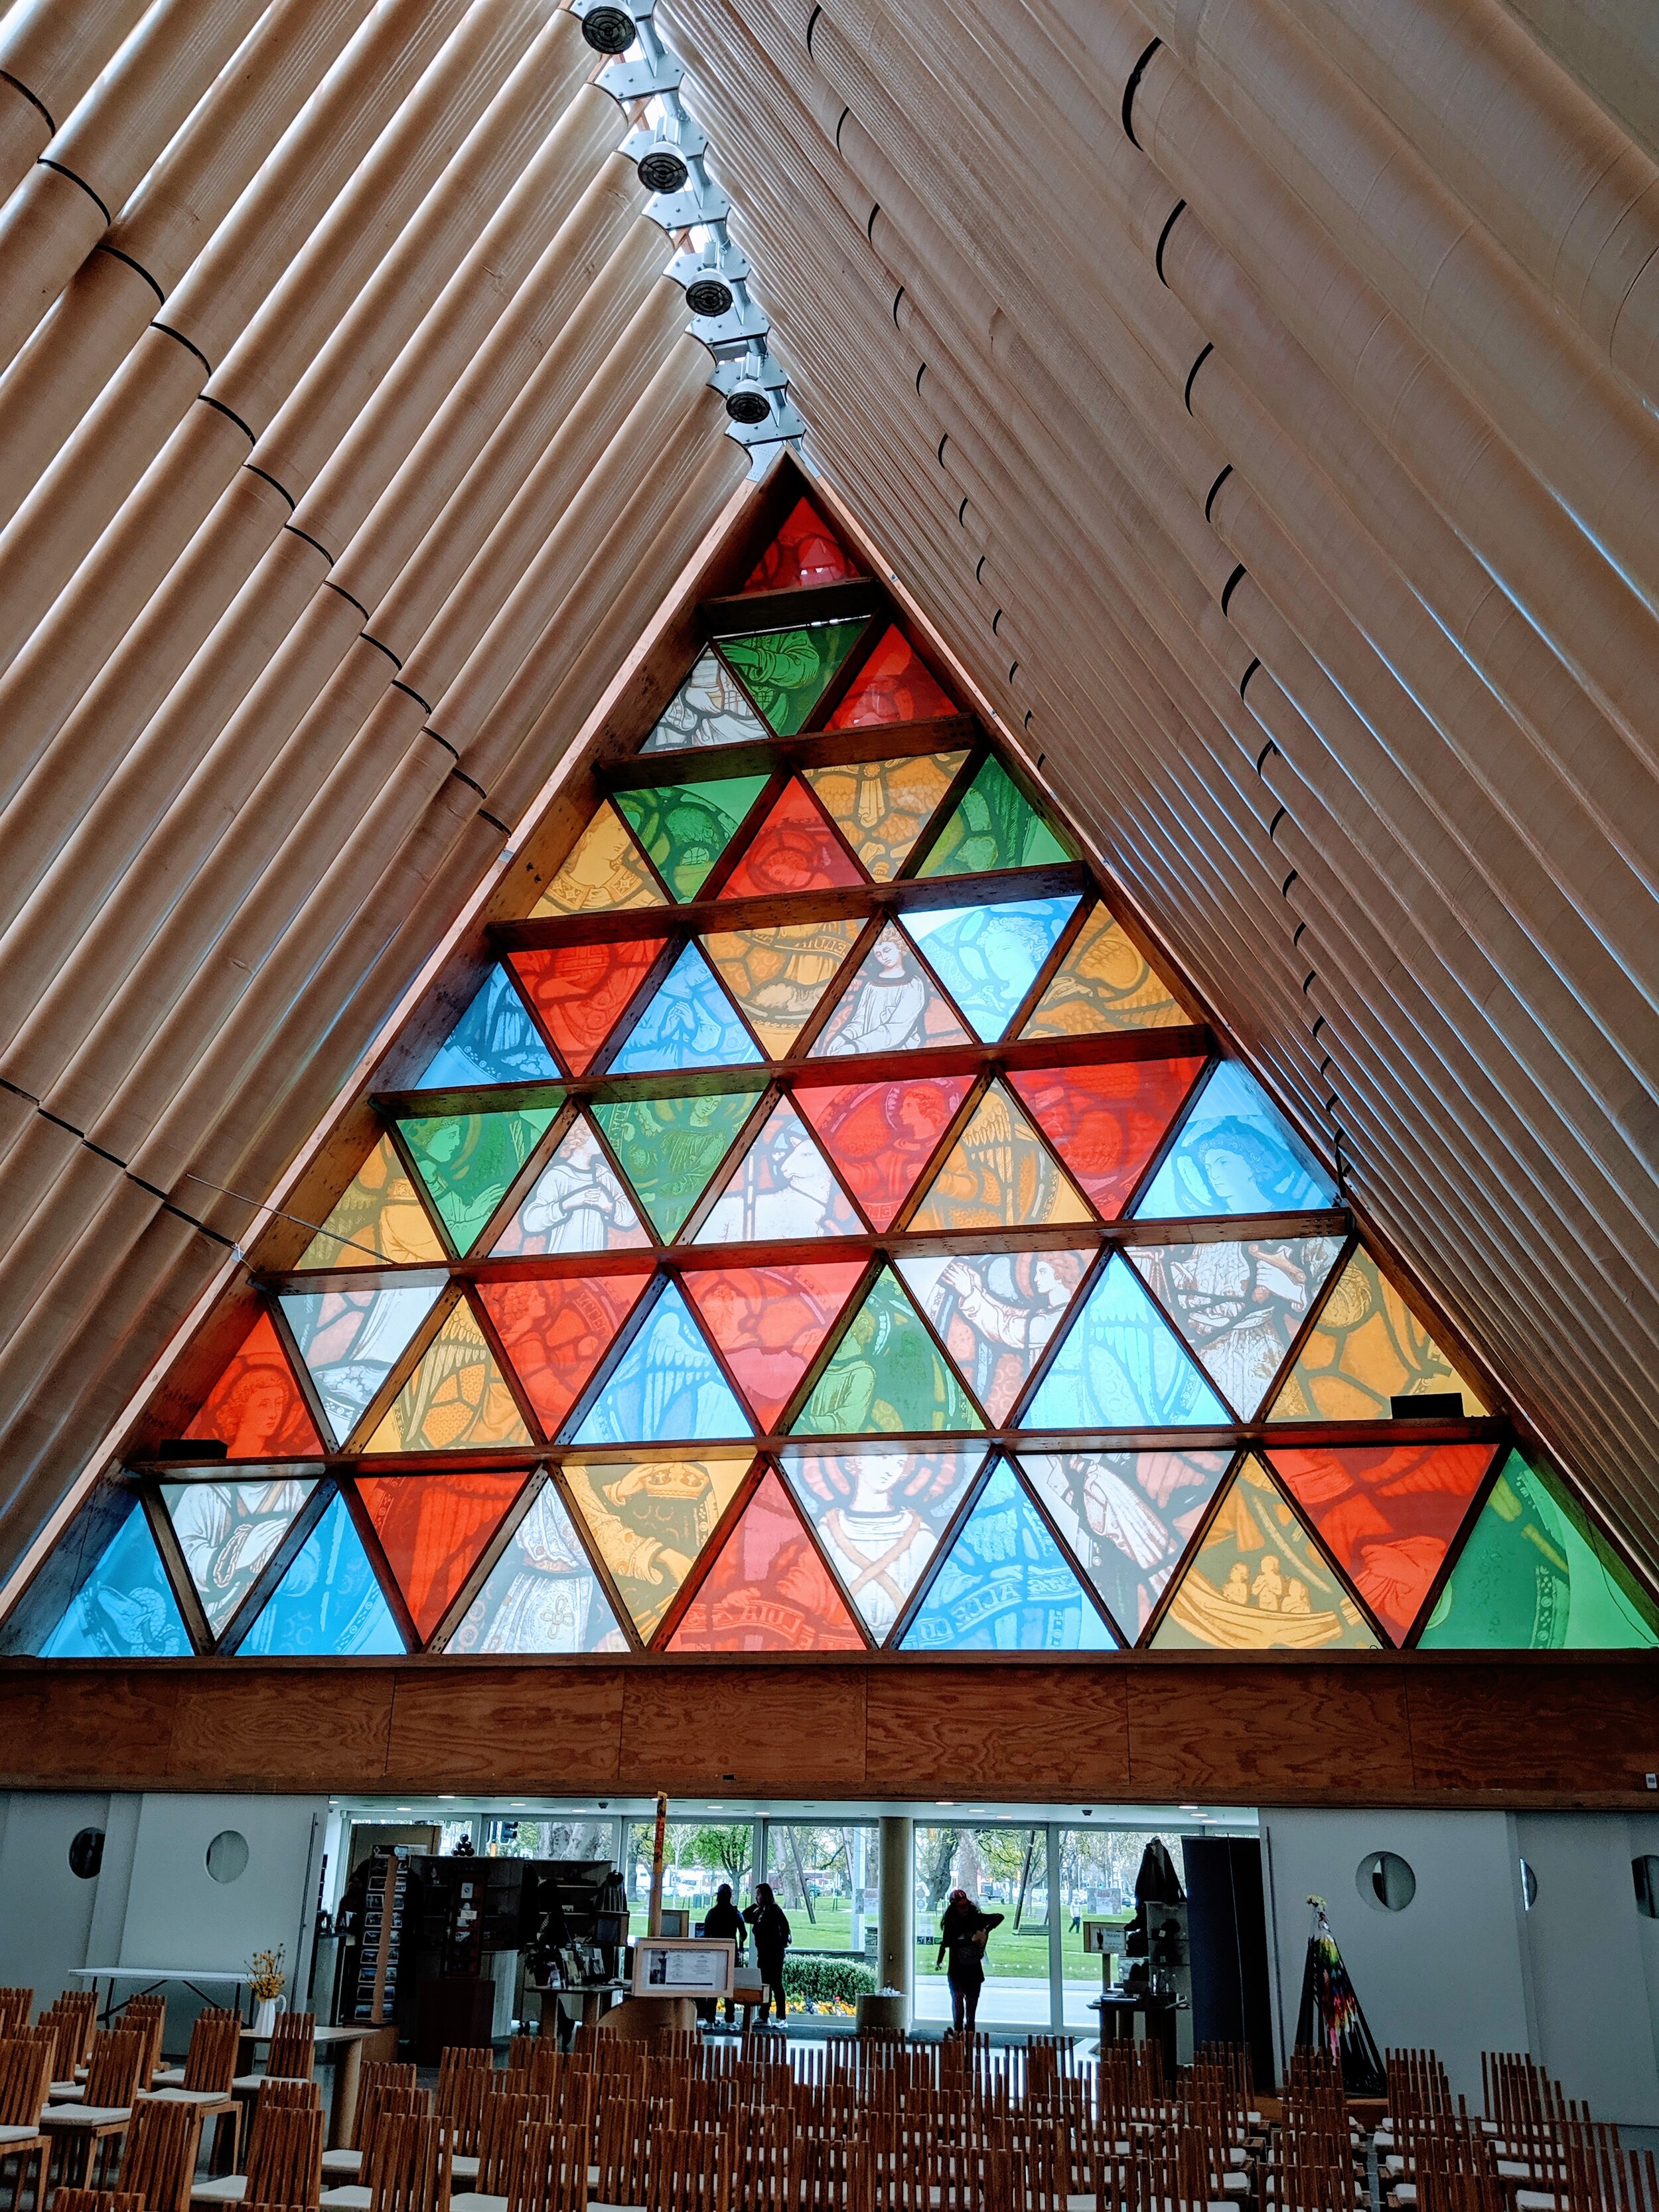  Stained glass window in the Cardboard Cathedral. 